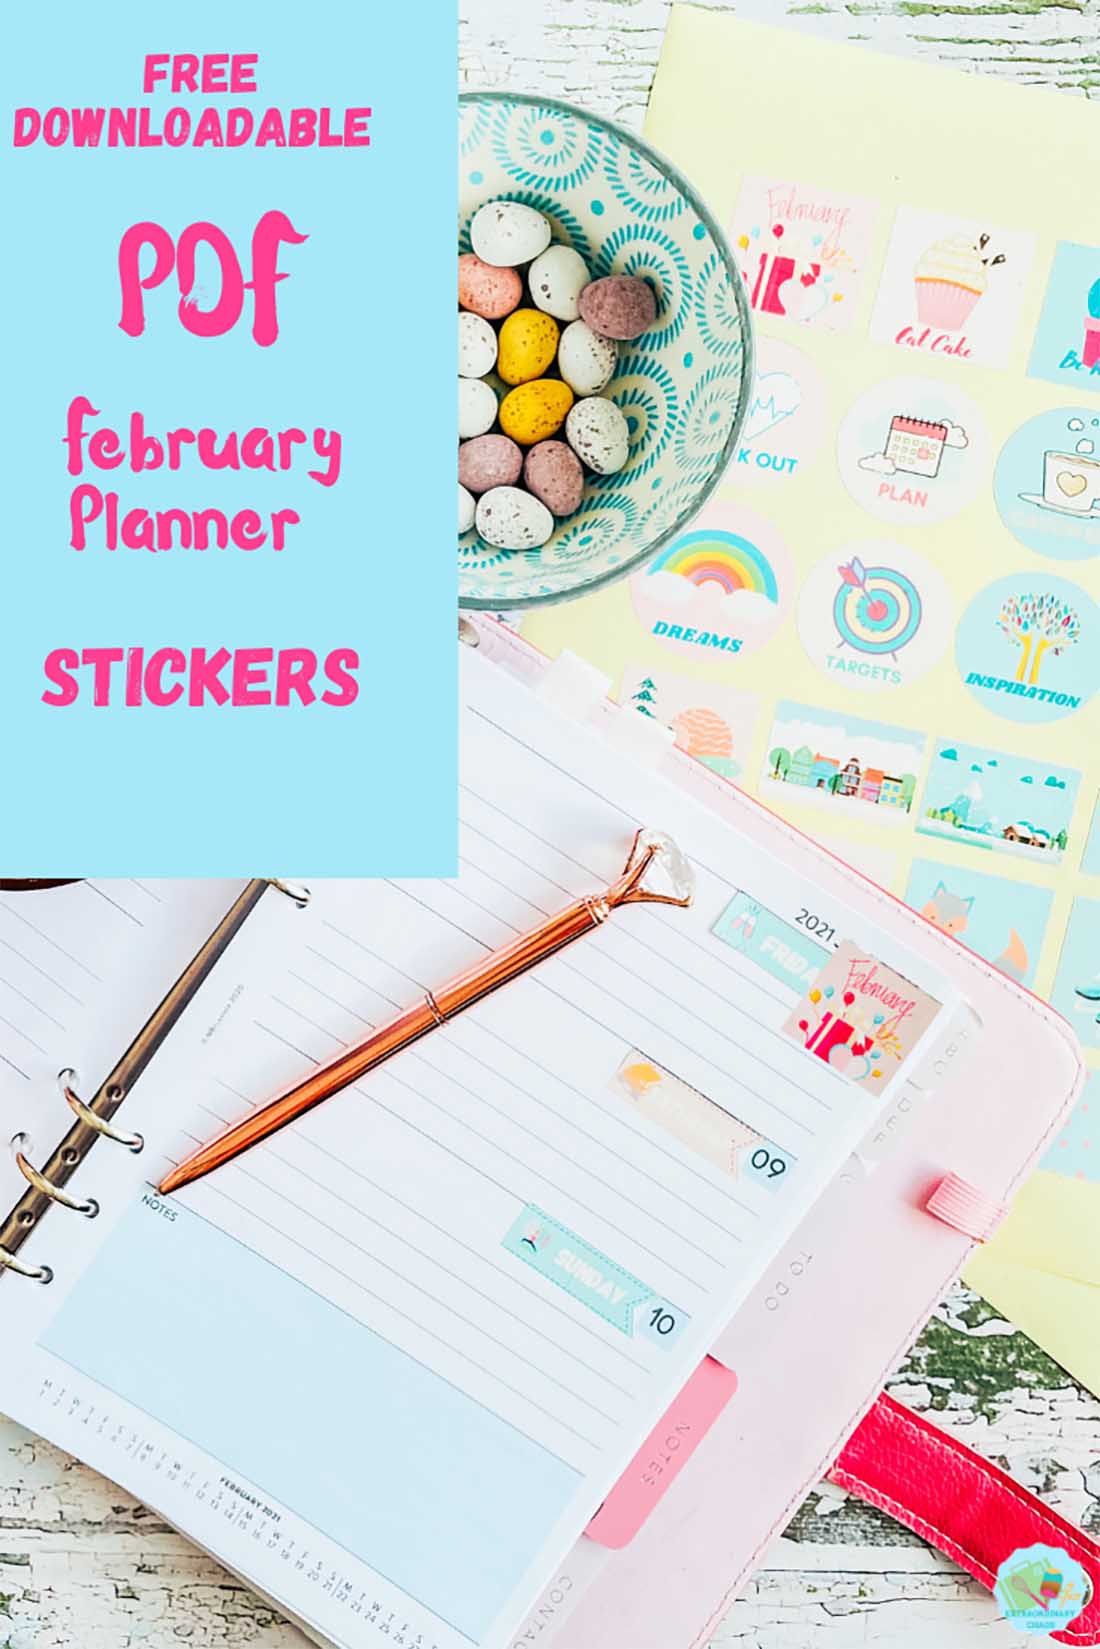 Free Downloadable PDF and PNG planner stickers for February